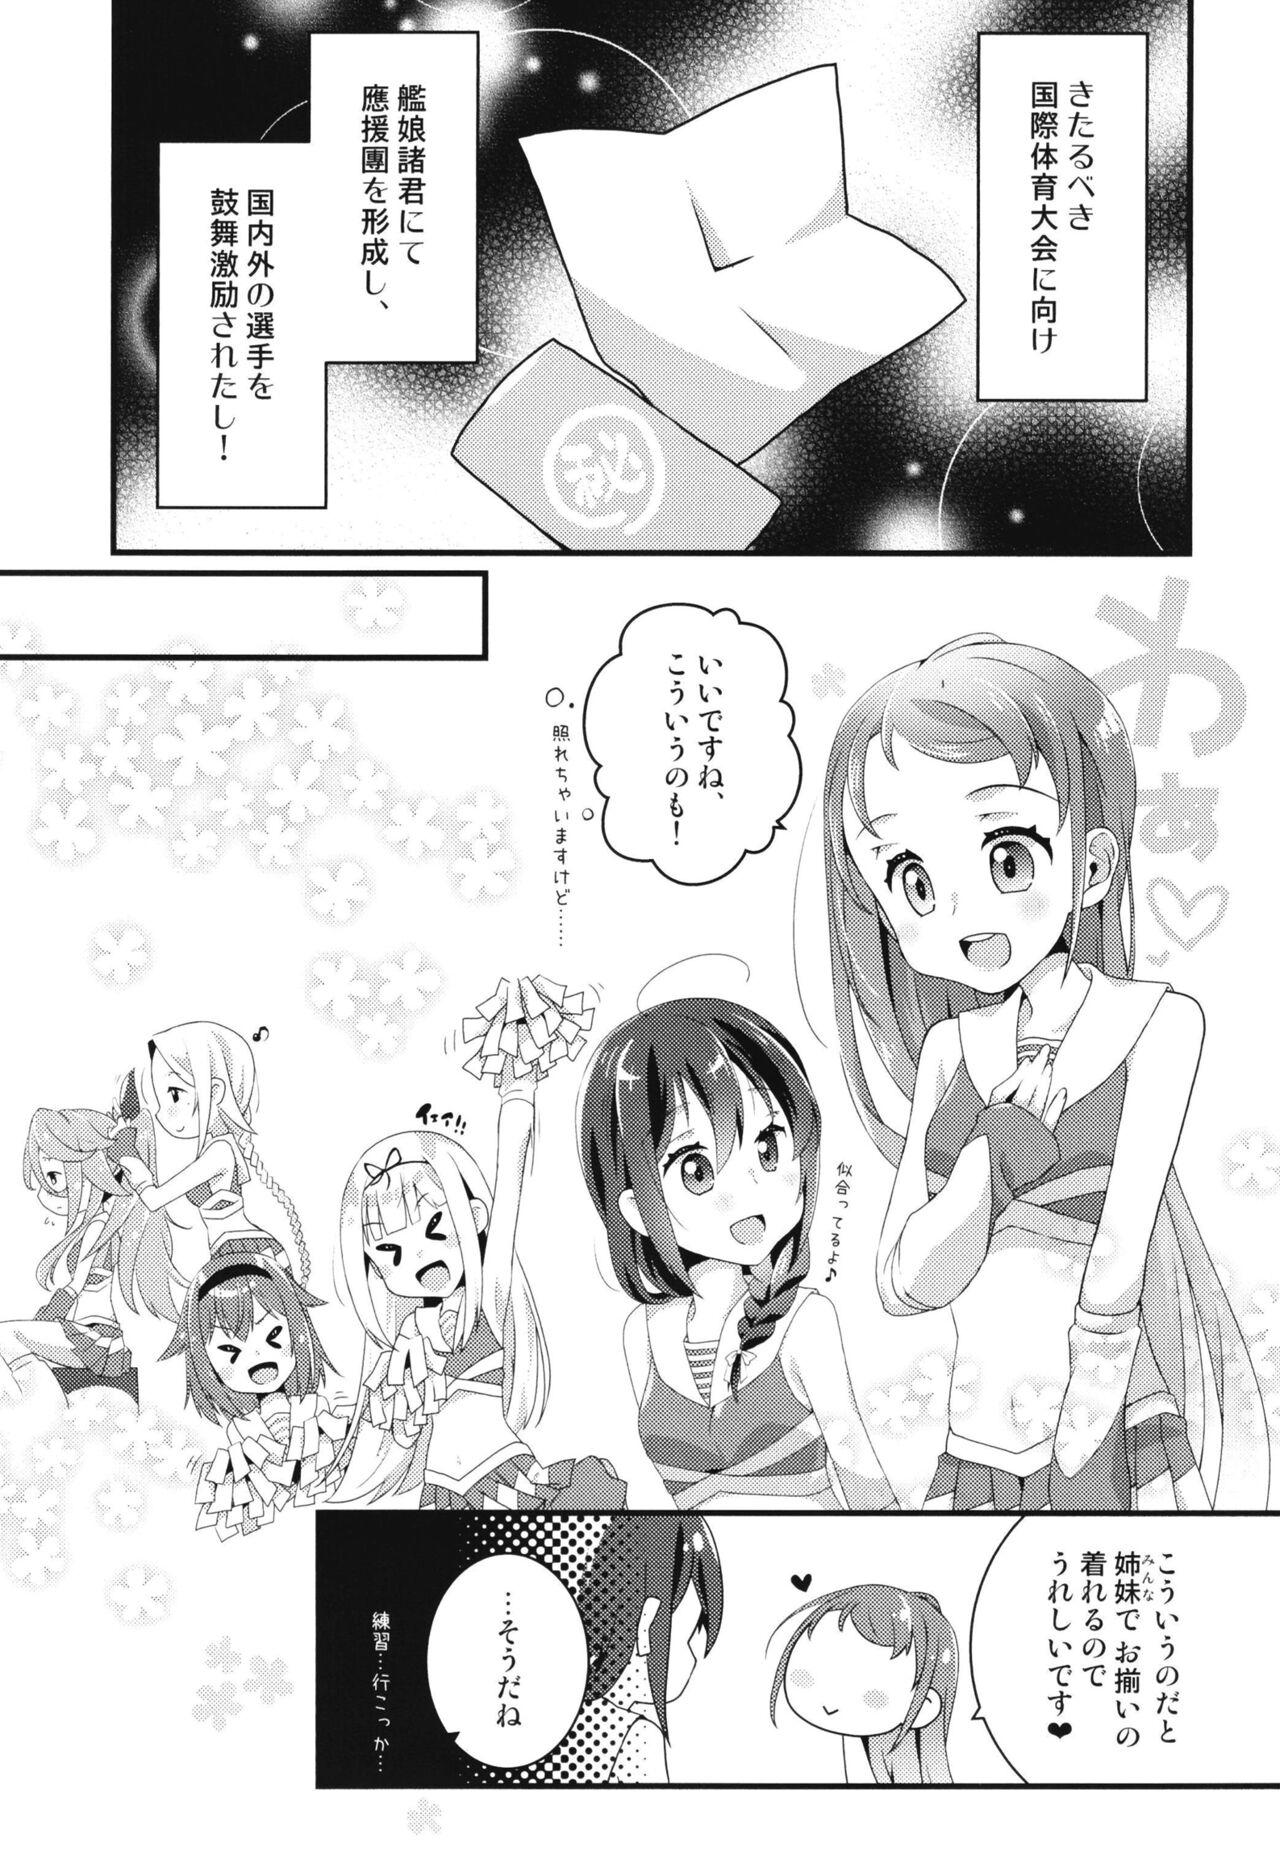 Interview Yah! Cheer! yeah! - Kantai collection Twistys - Page 3